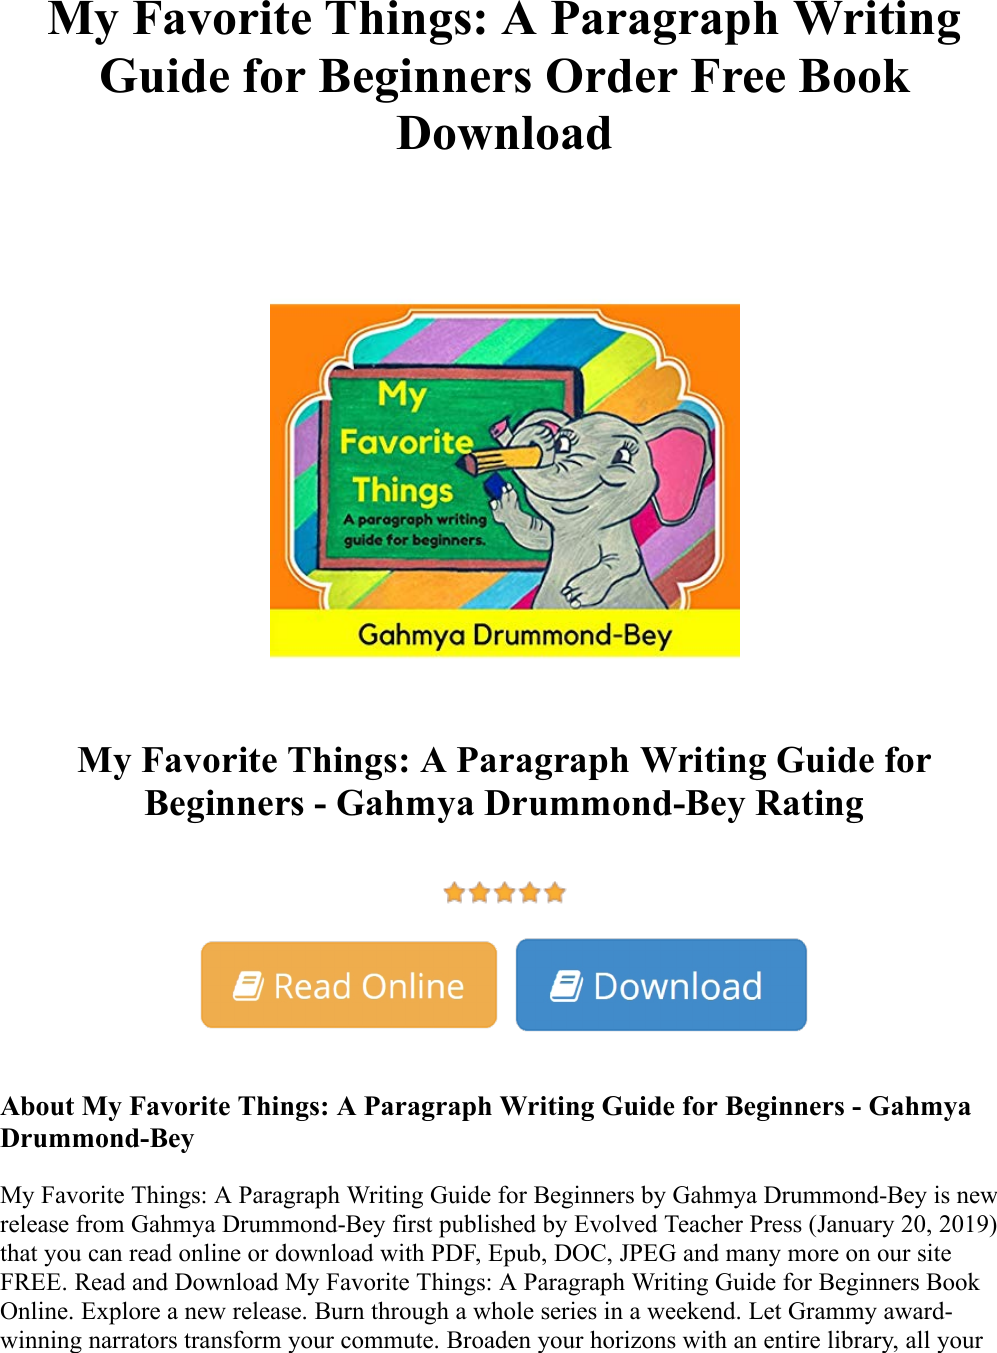 Page 1 of 2 - My Favorite Things: A Paragraph Writing Guide For Beginners - Gahmya Drummond-Bey Order Free Book  My-Favorite-Things-A-Paragraph-Writing-Guide-for-Beginners